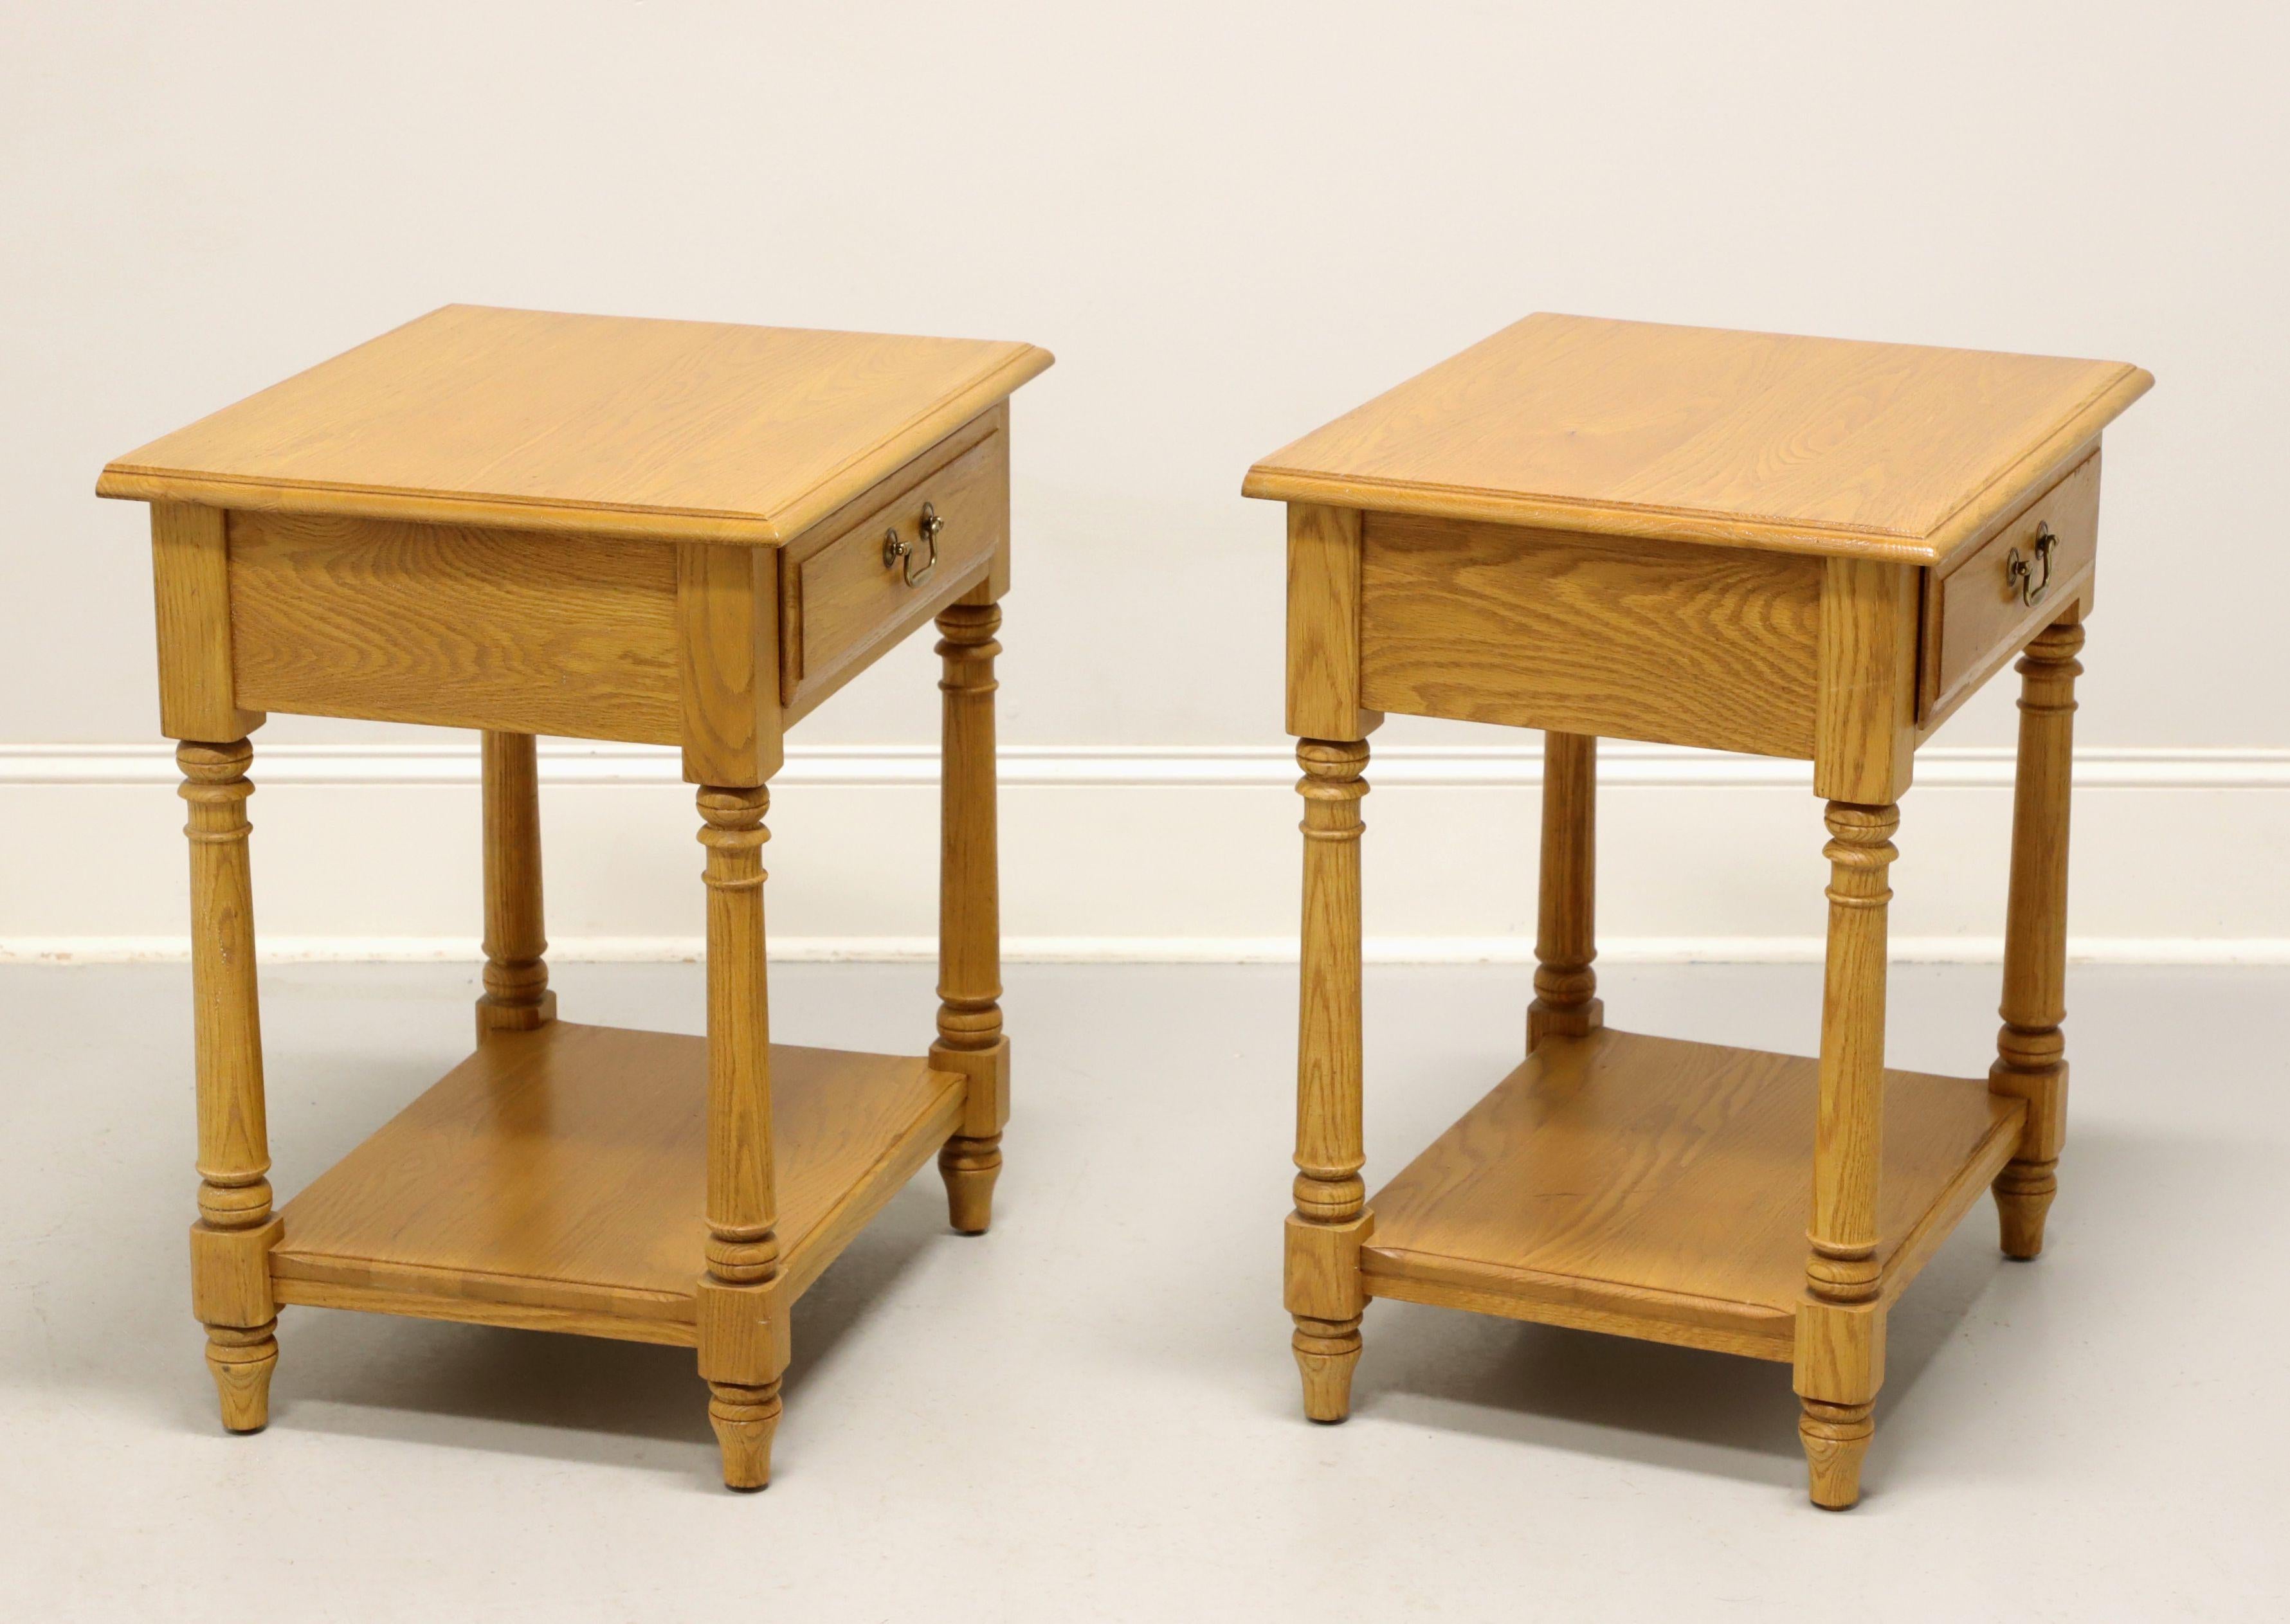 A pair of American Colonial style nightstands, unbranded, similar in quality to Thomasville. White oak with bass hardware, ogee edge to the top, turned side posts, undertier shelf and spade feet. Features one drawer of dovetail construction. Likely